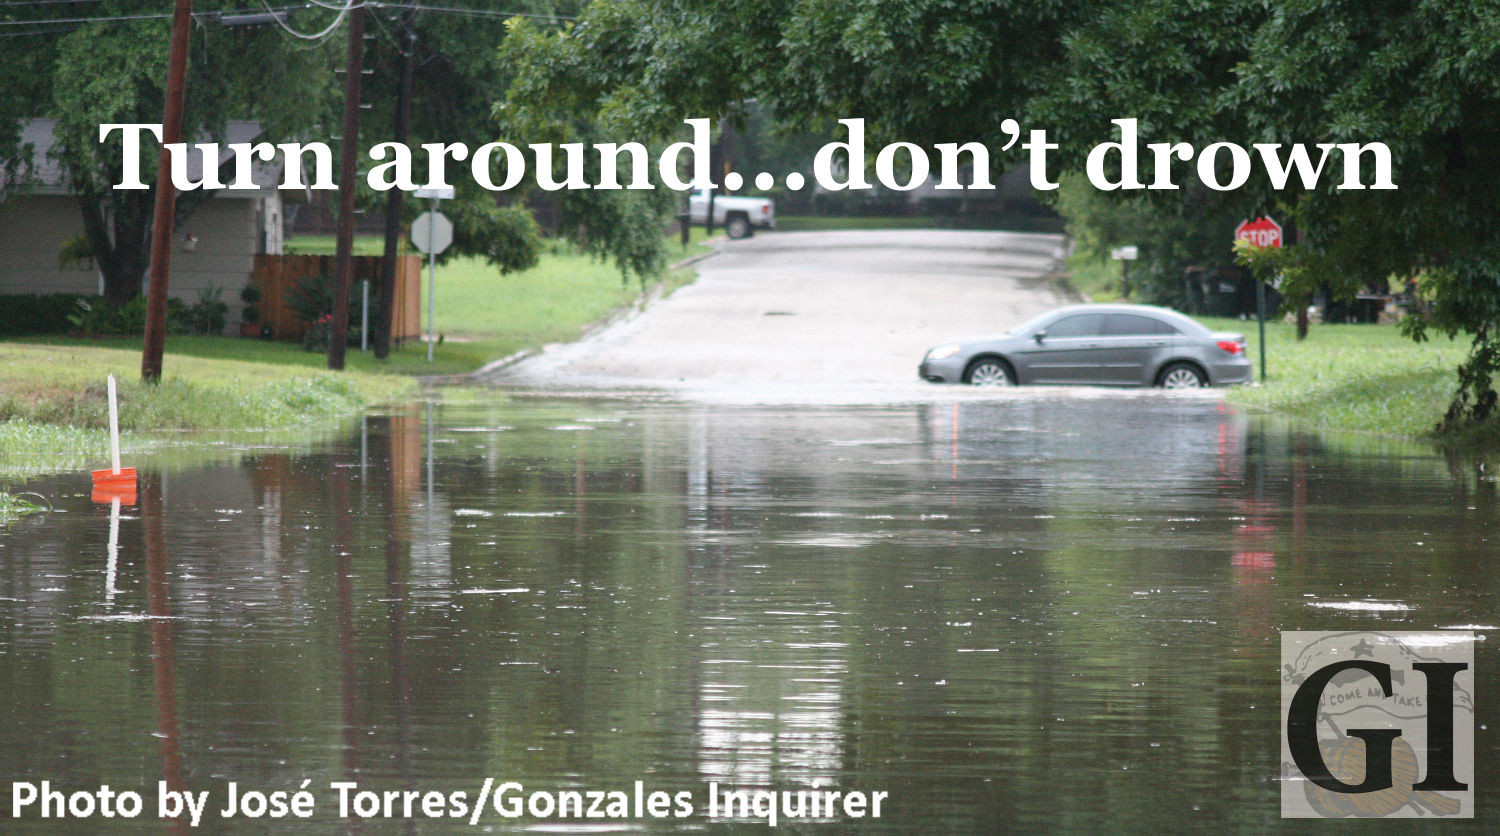 Officials urge drivers not to ignore barricades and drive through areas where the water covers the roadway. When encountering flooded roads, make the smart choice: TURN AROUND... DON’T DROWN.